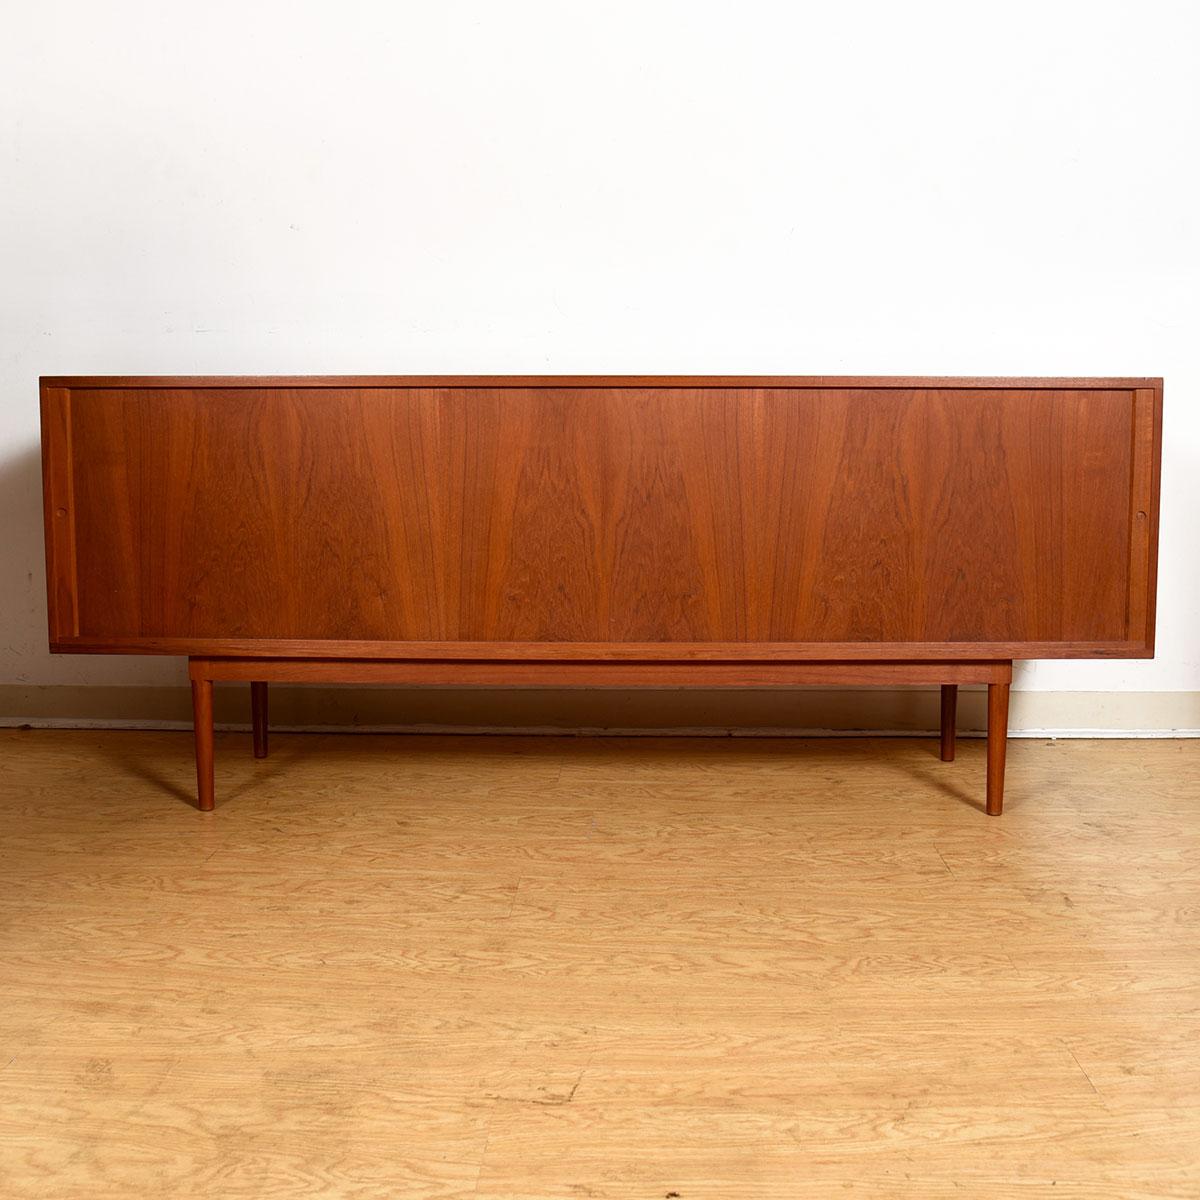 Lovig Danish Modern Teak Tambour Door Credenza Room-Divider

Additional Information:
Material: Teak
Featured at DC:
Wonderful teak example of the classic Danish sideboard with two long Tambour doors.
Shelved storage throughout for storing